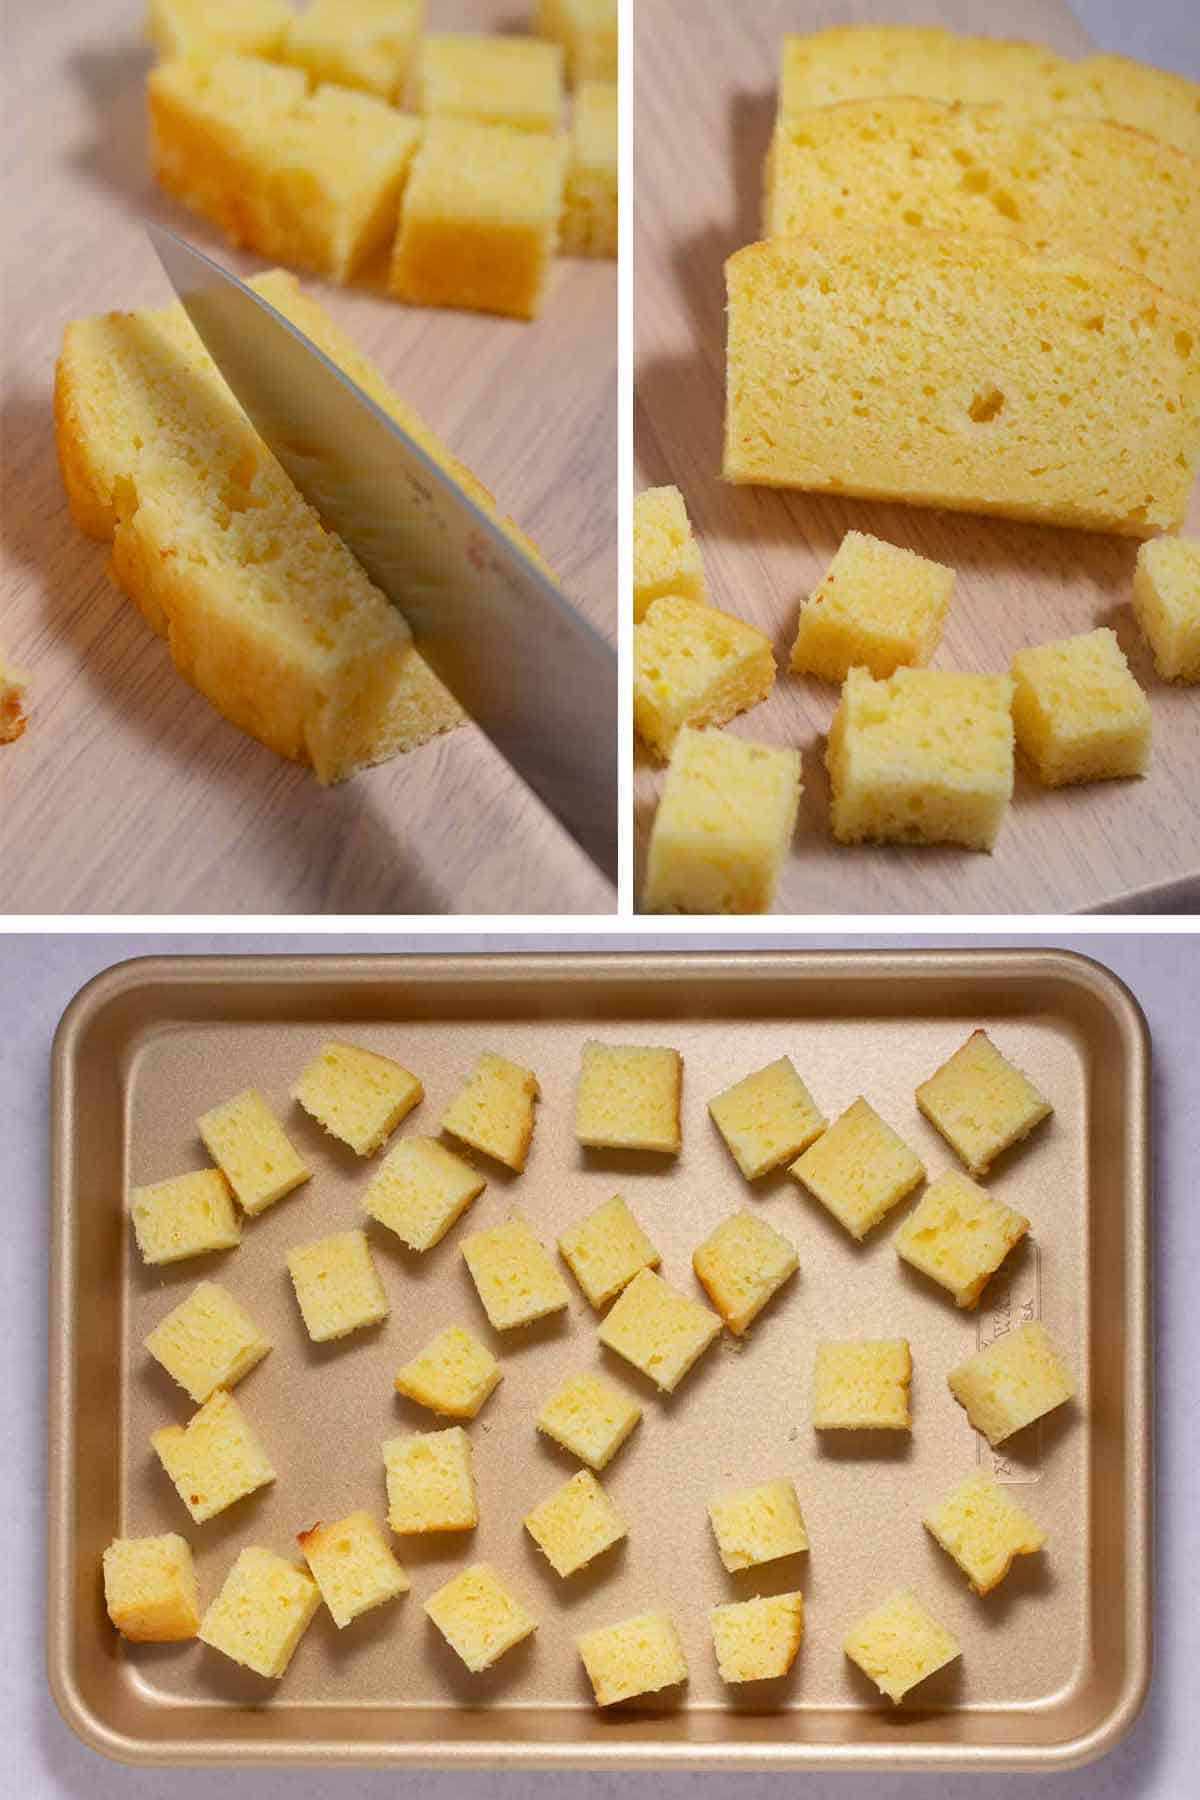 Cubing the lemon cake slices and laying them out overnight to dry.